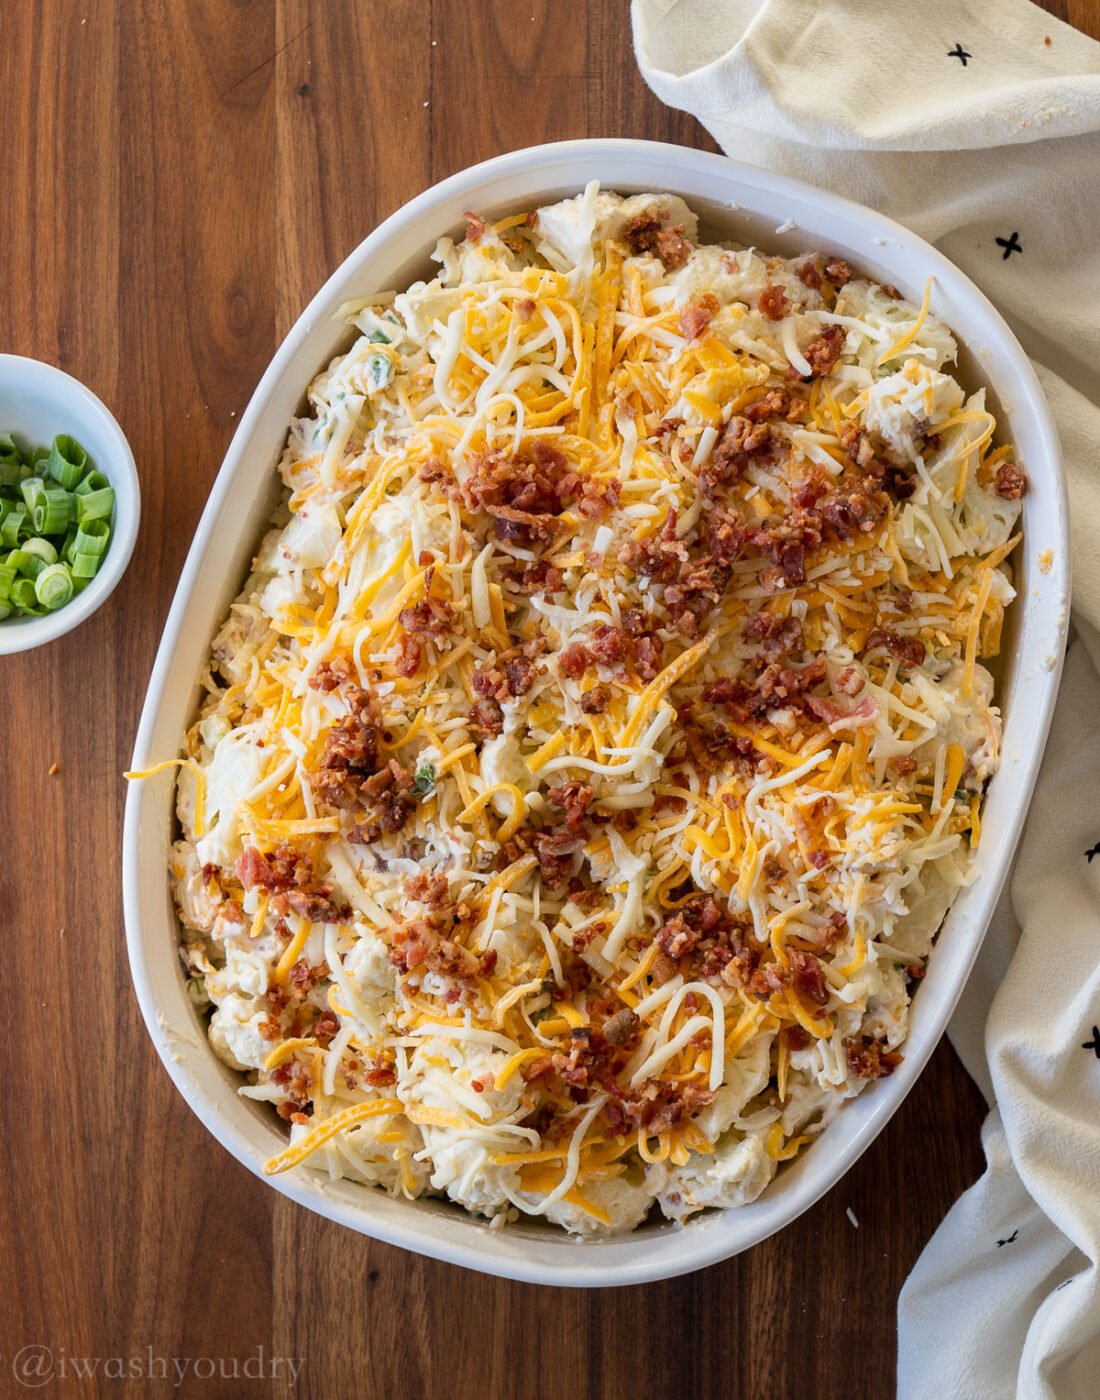 unbaked cauliflower casserole with cheese and bacon on top